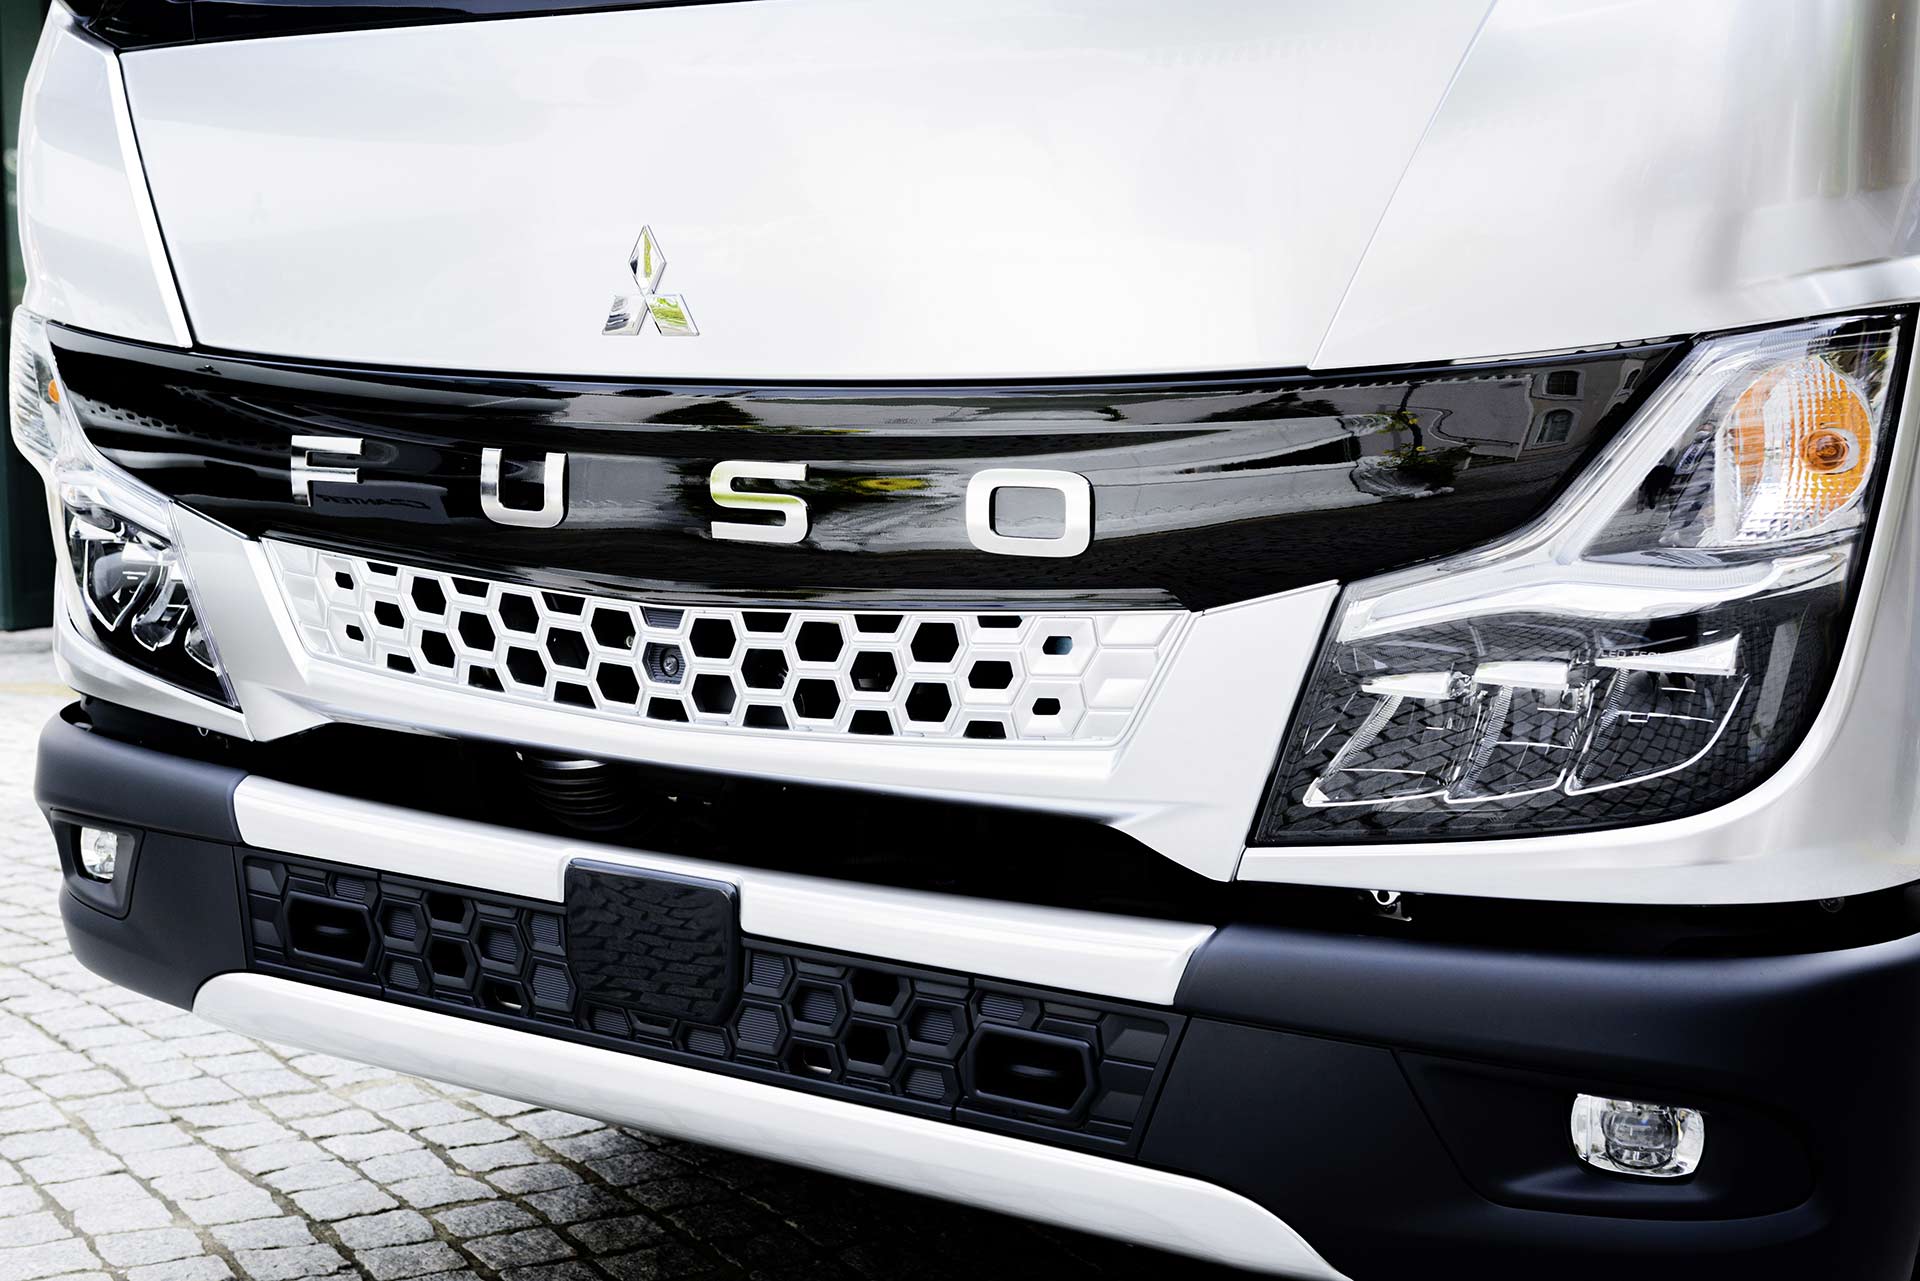 Fuso Truck Front